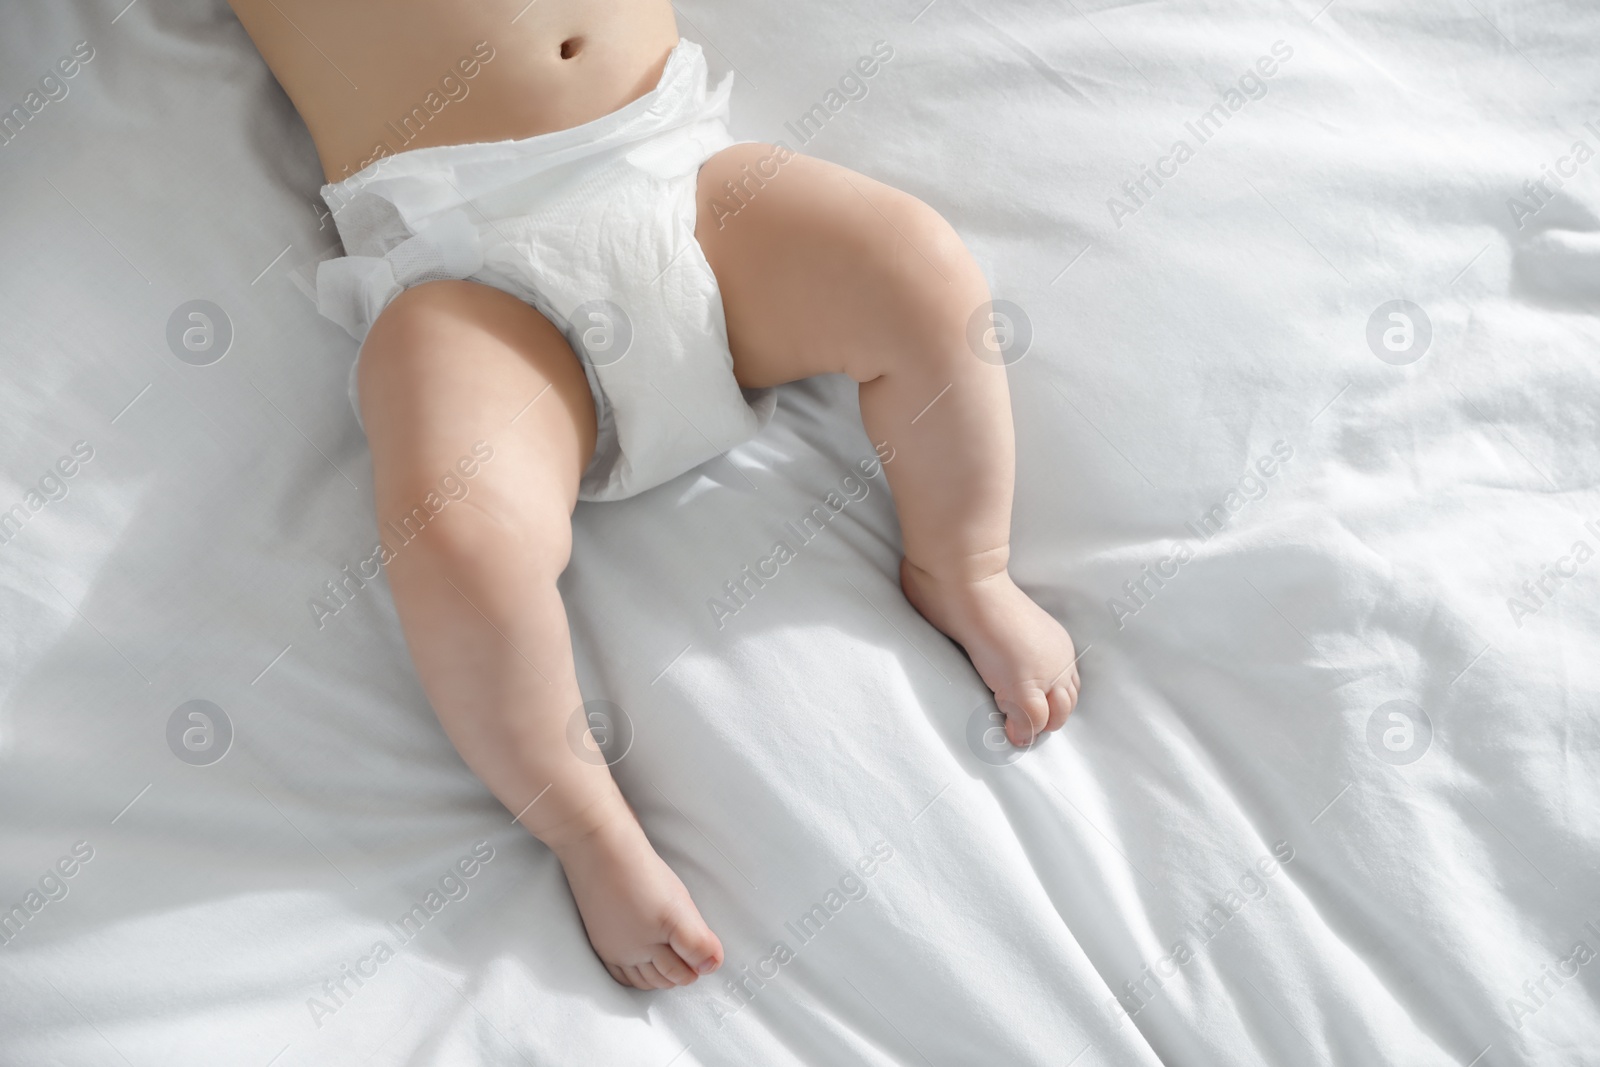 Photo of Little baby in diaper lying on bed at home, closeup view